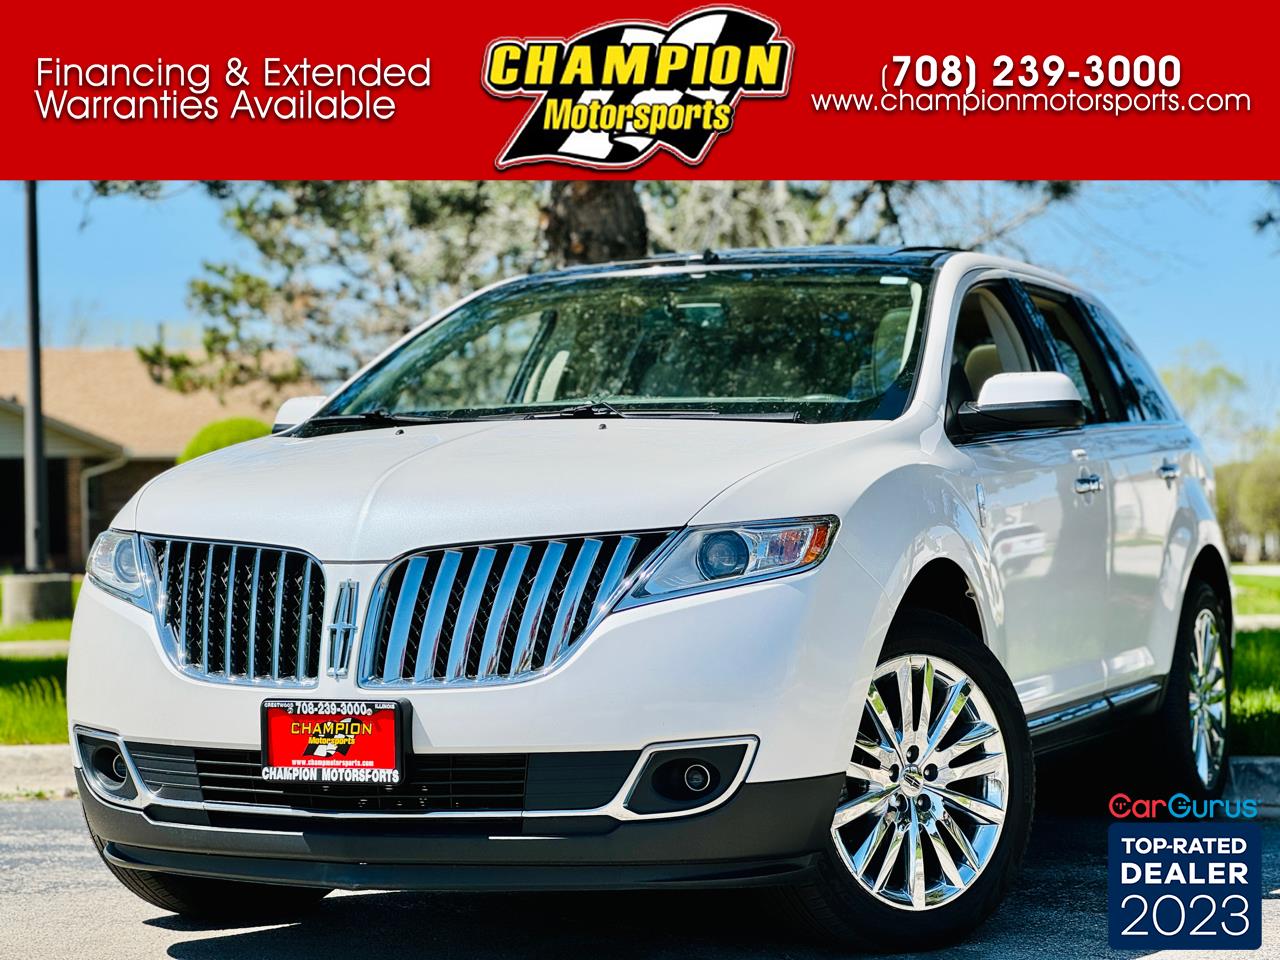 2011 Lincoln MKX AWD 4dr